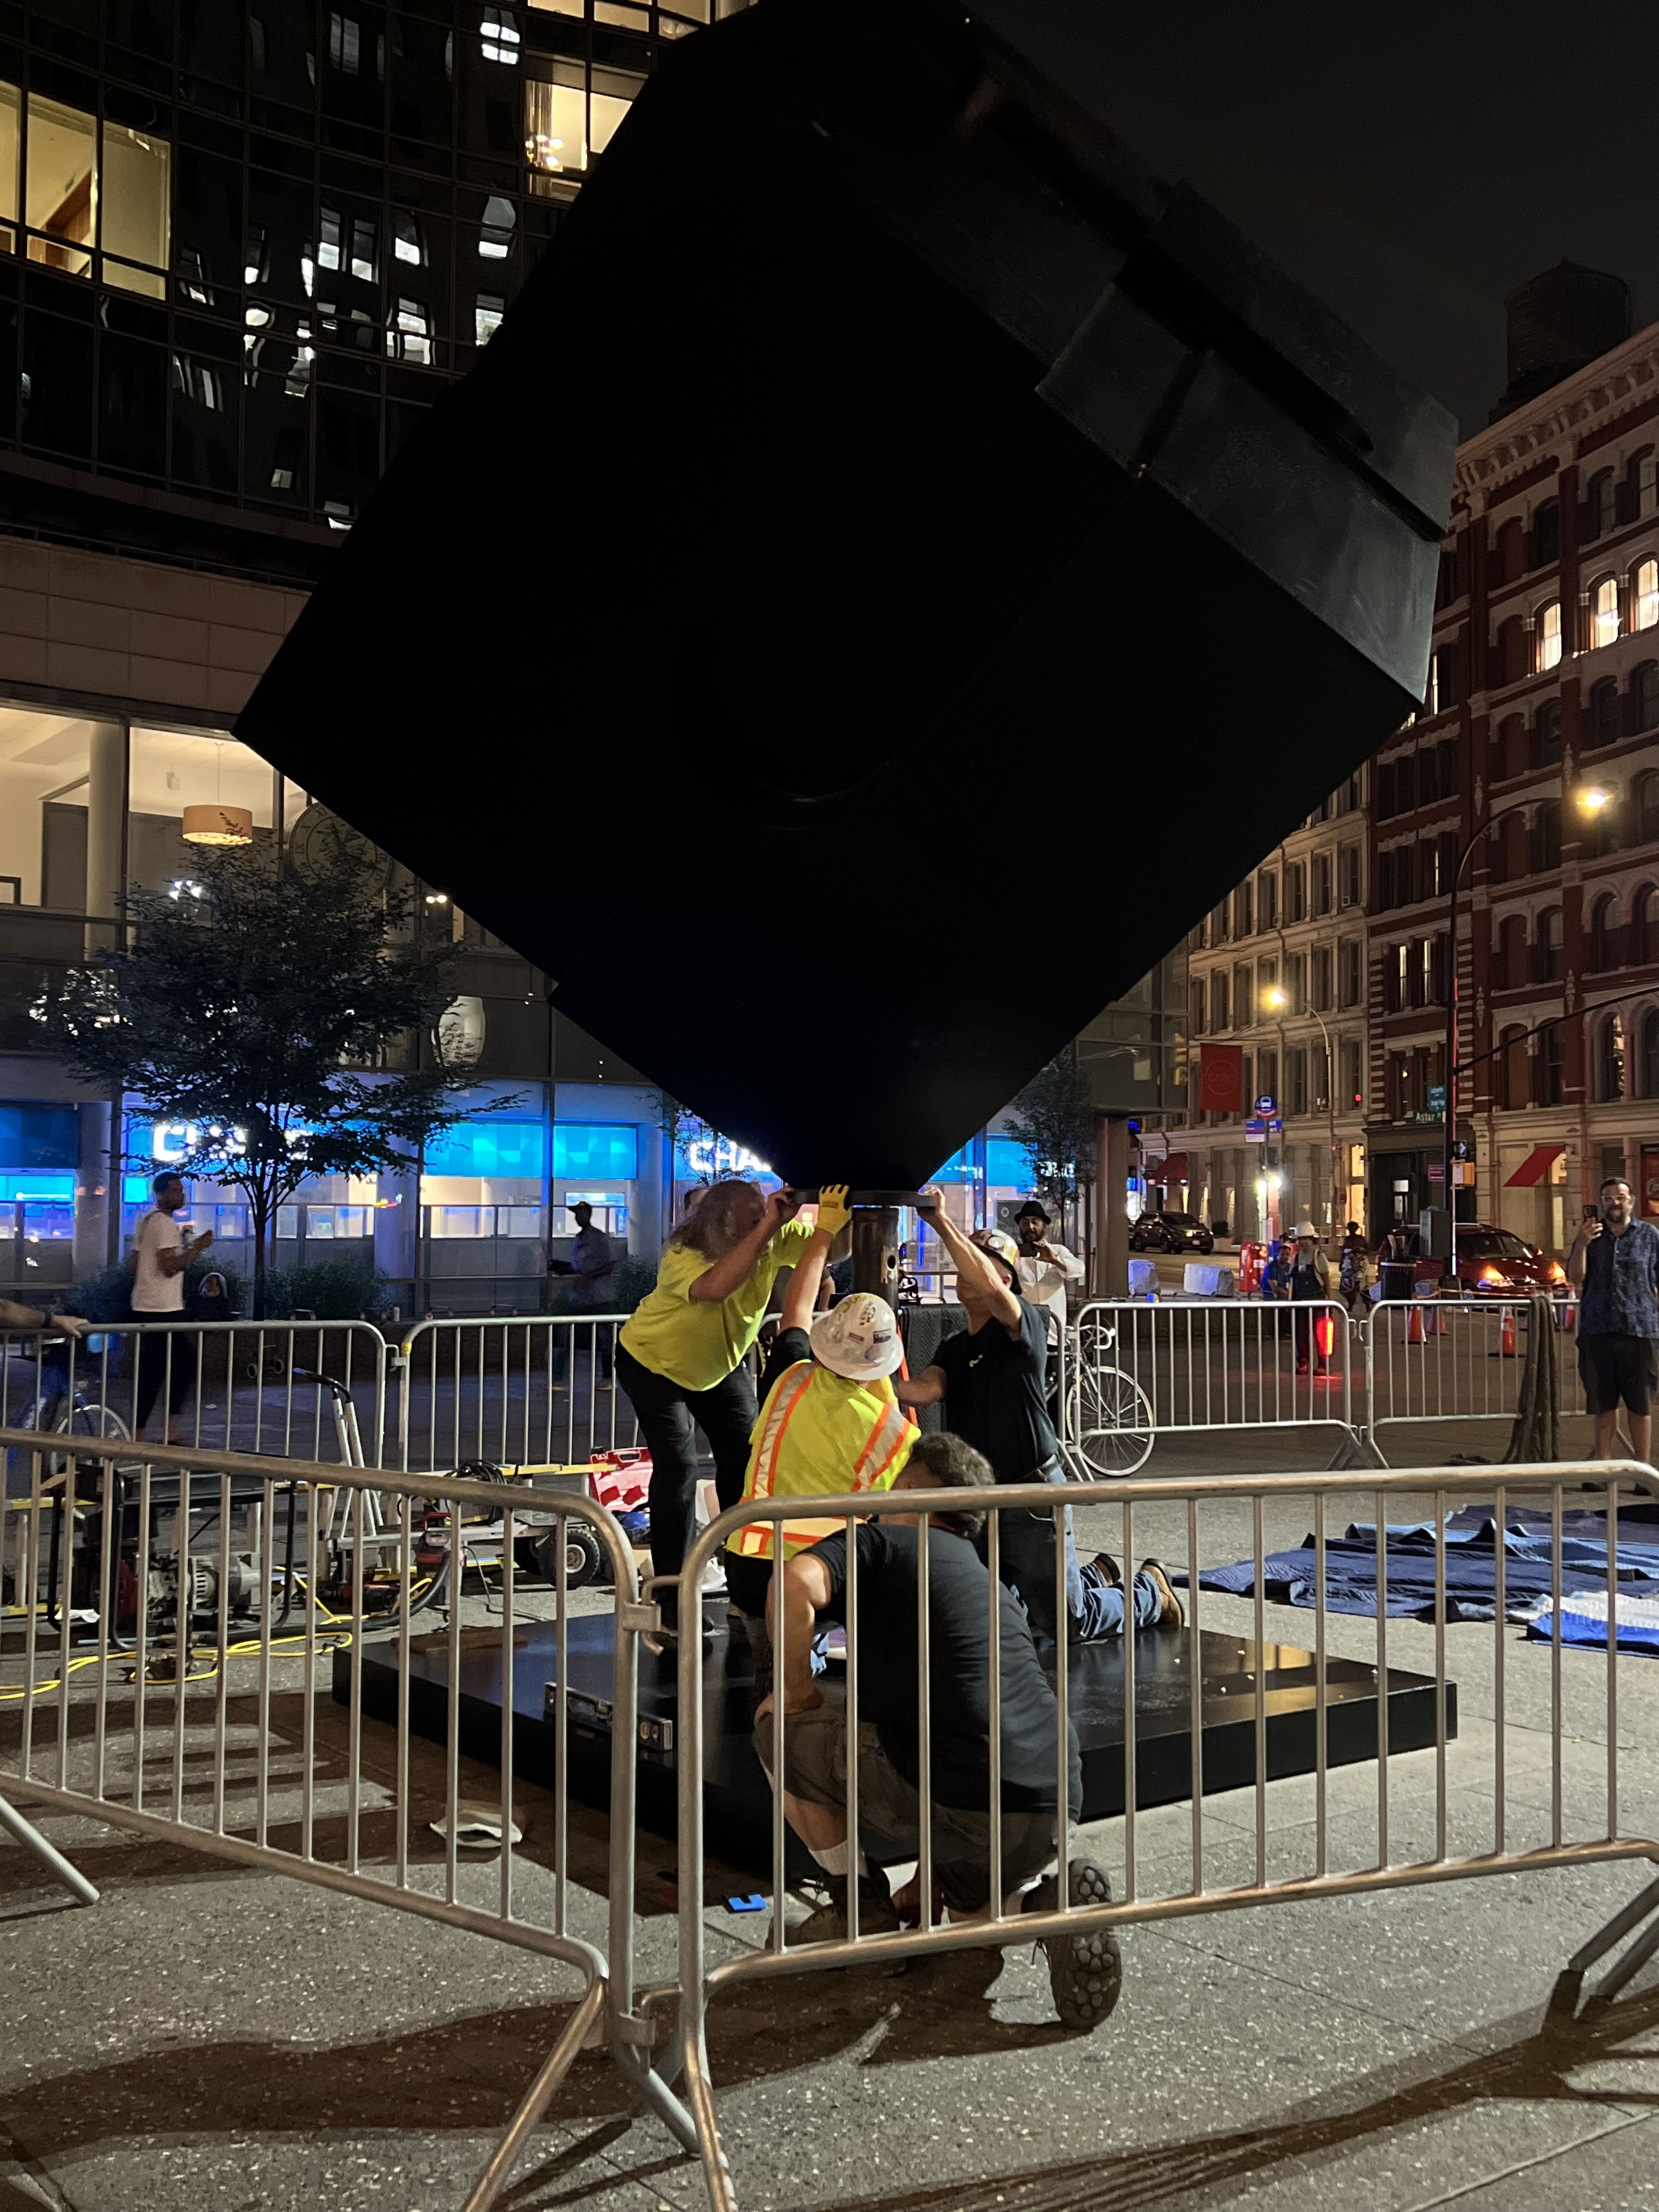 EV Grieve: On Astor Place, the cube will BRB to spin again